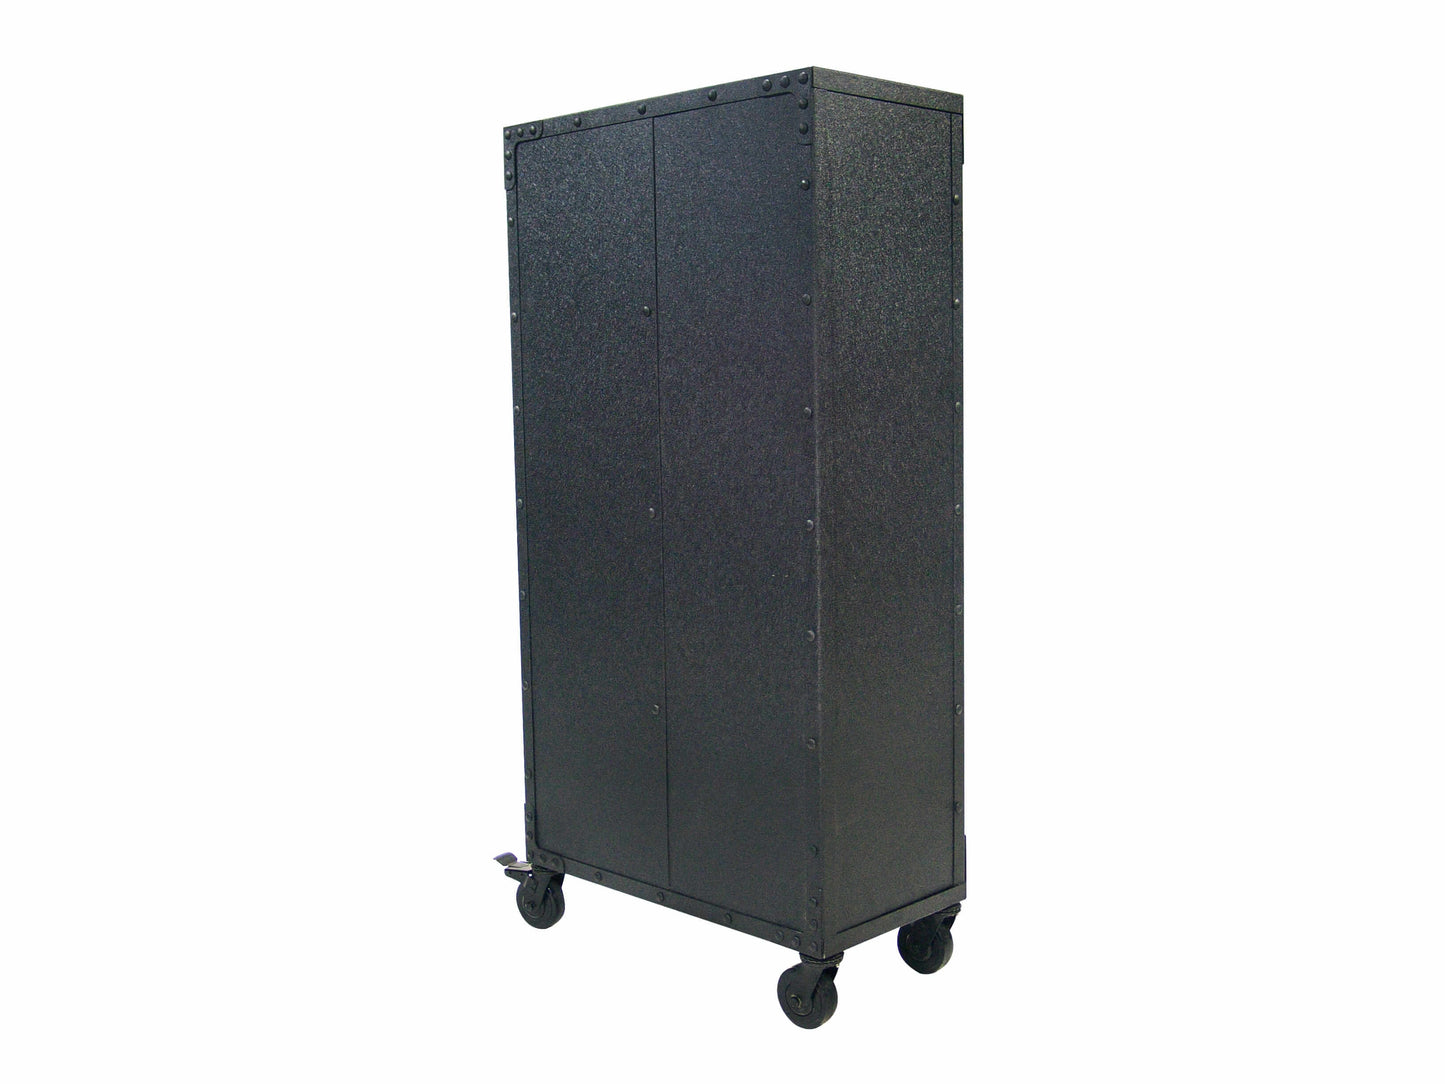 DuraMax 36 In x 72 In Industrial Free Standing Cabinet with wheels